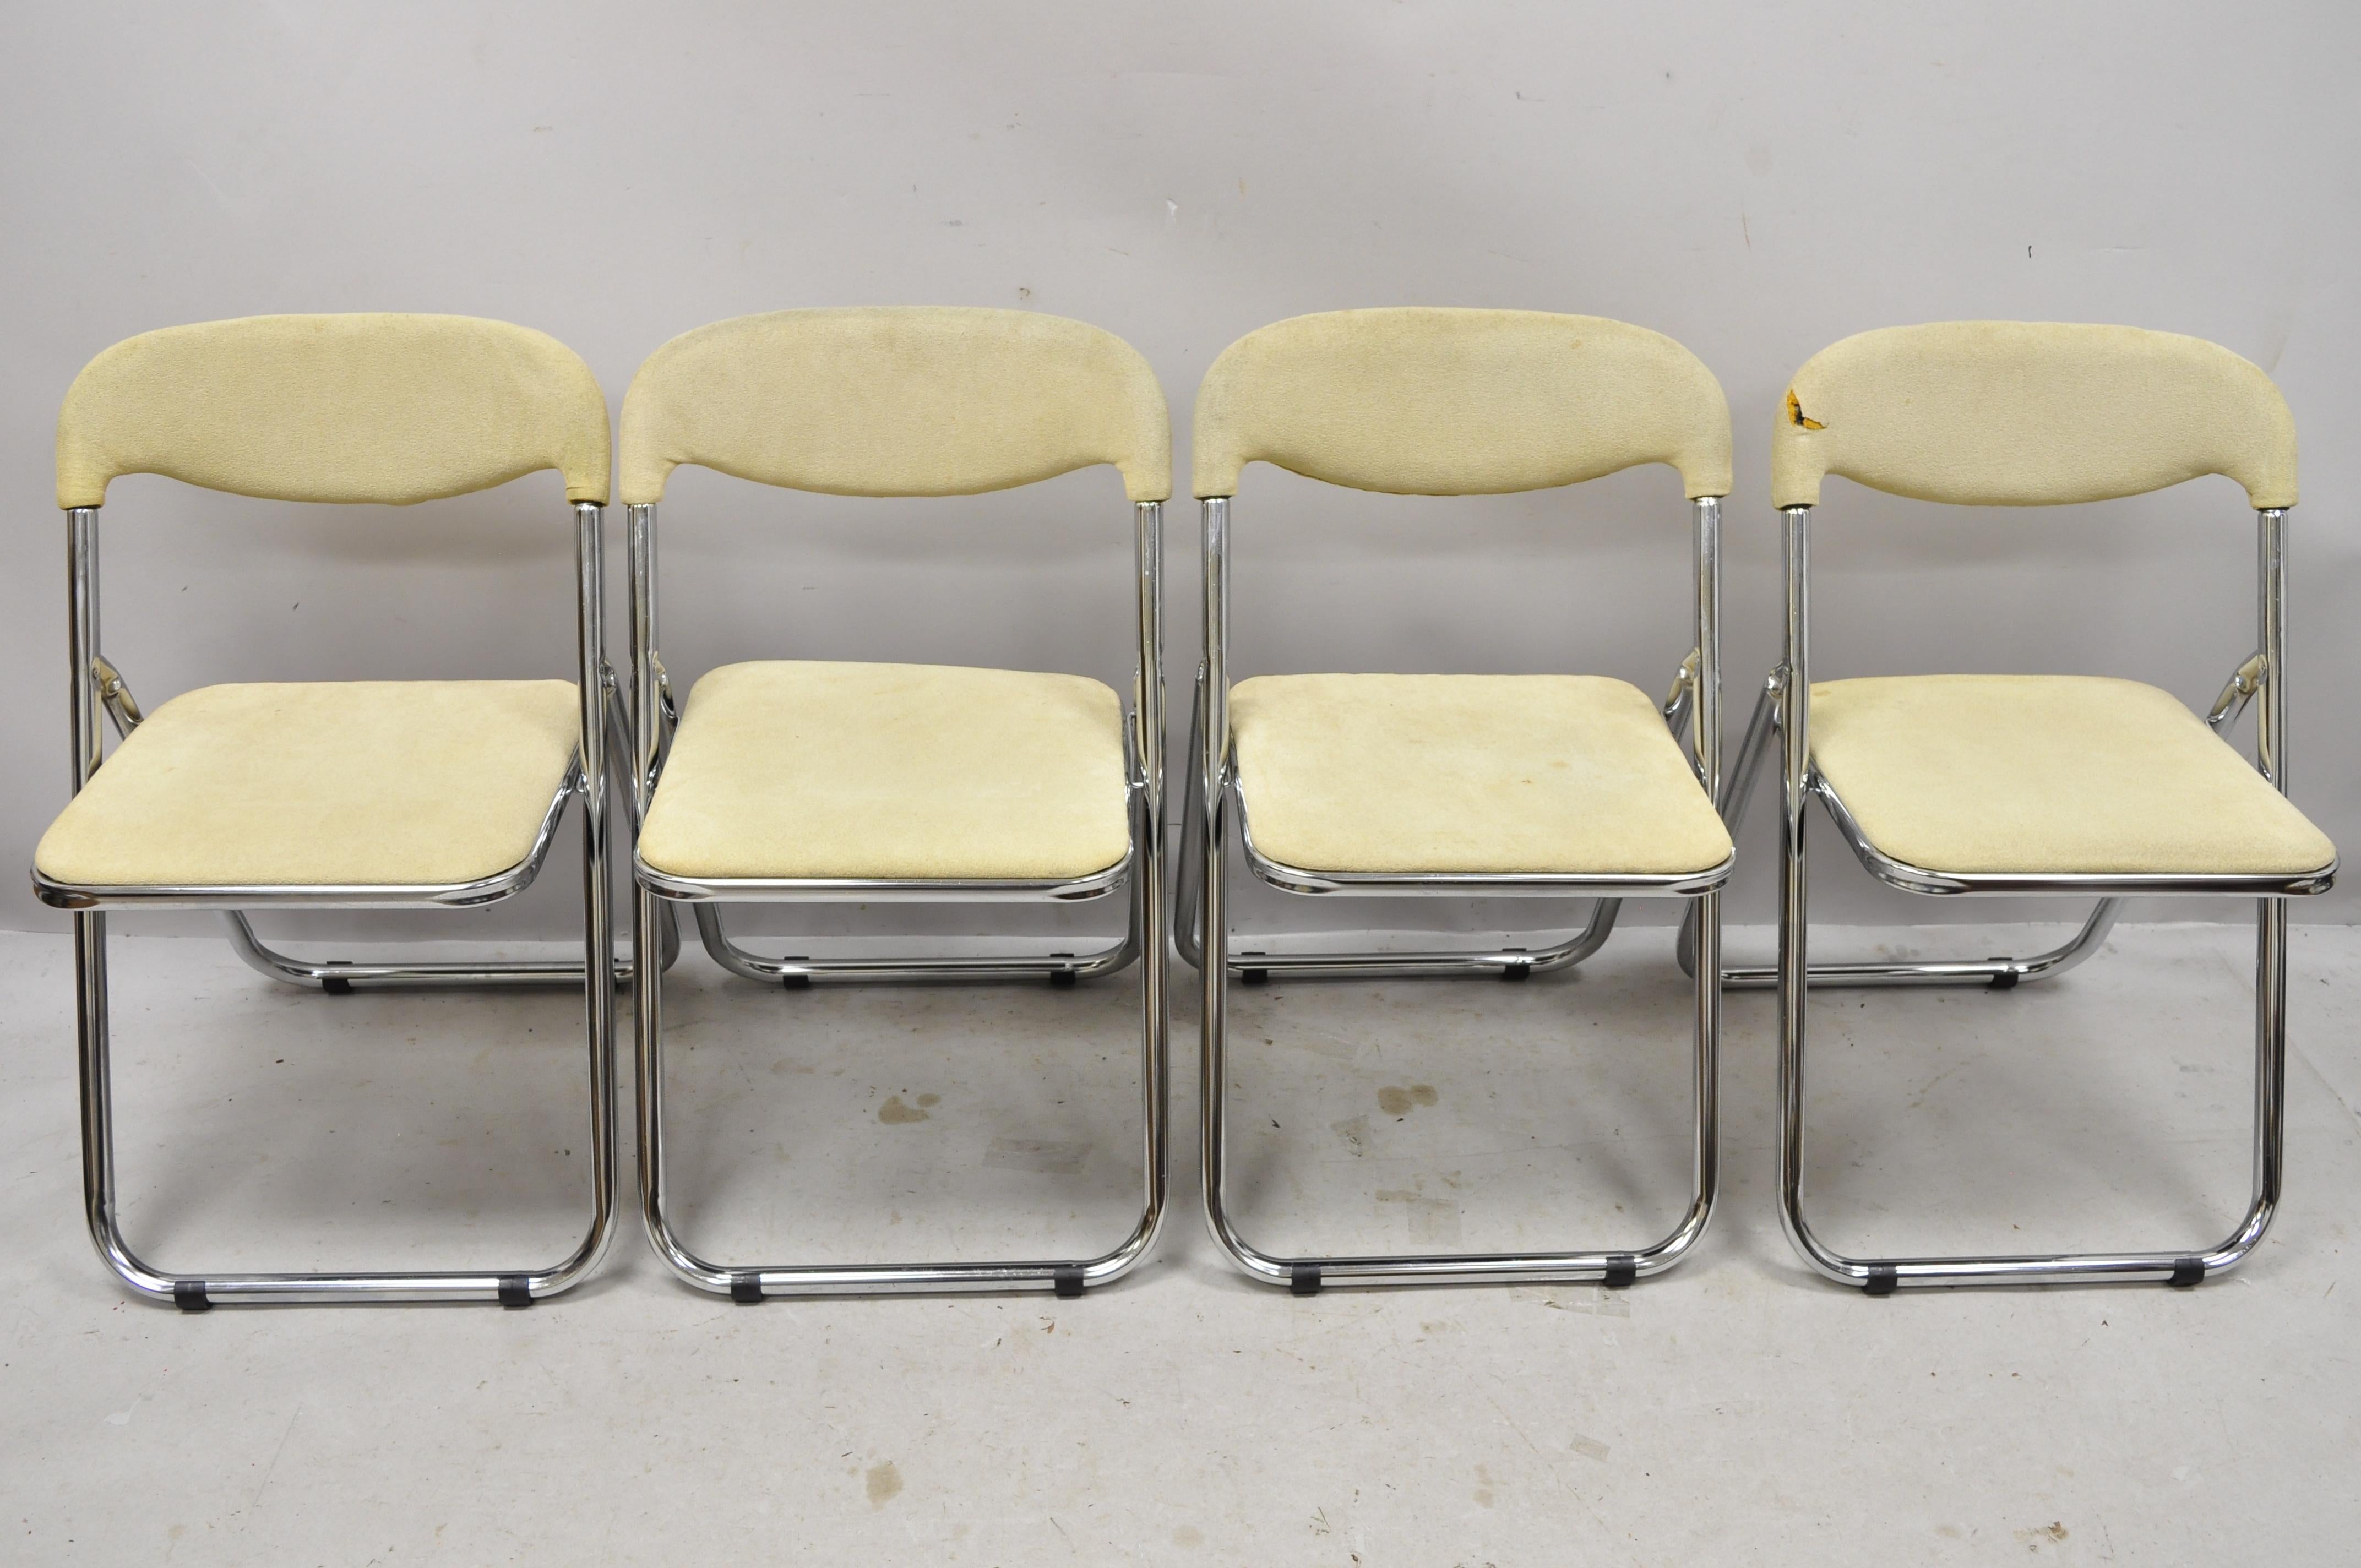 Vintage Italian Midcentury Chrome Upholstered Folding Game Chairs, Set of 4 For Sale 3